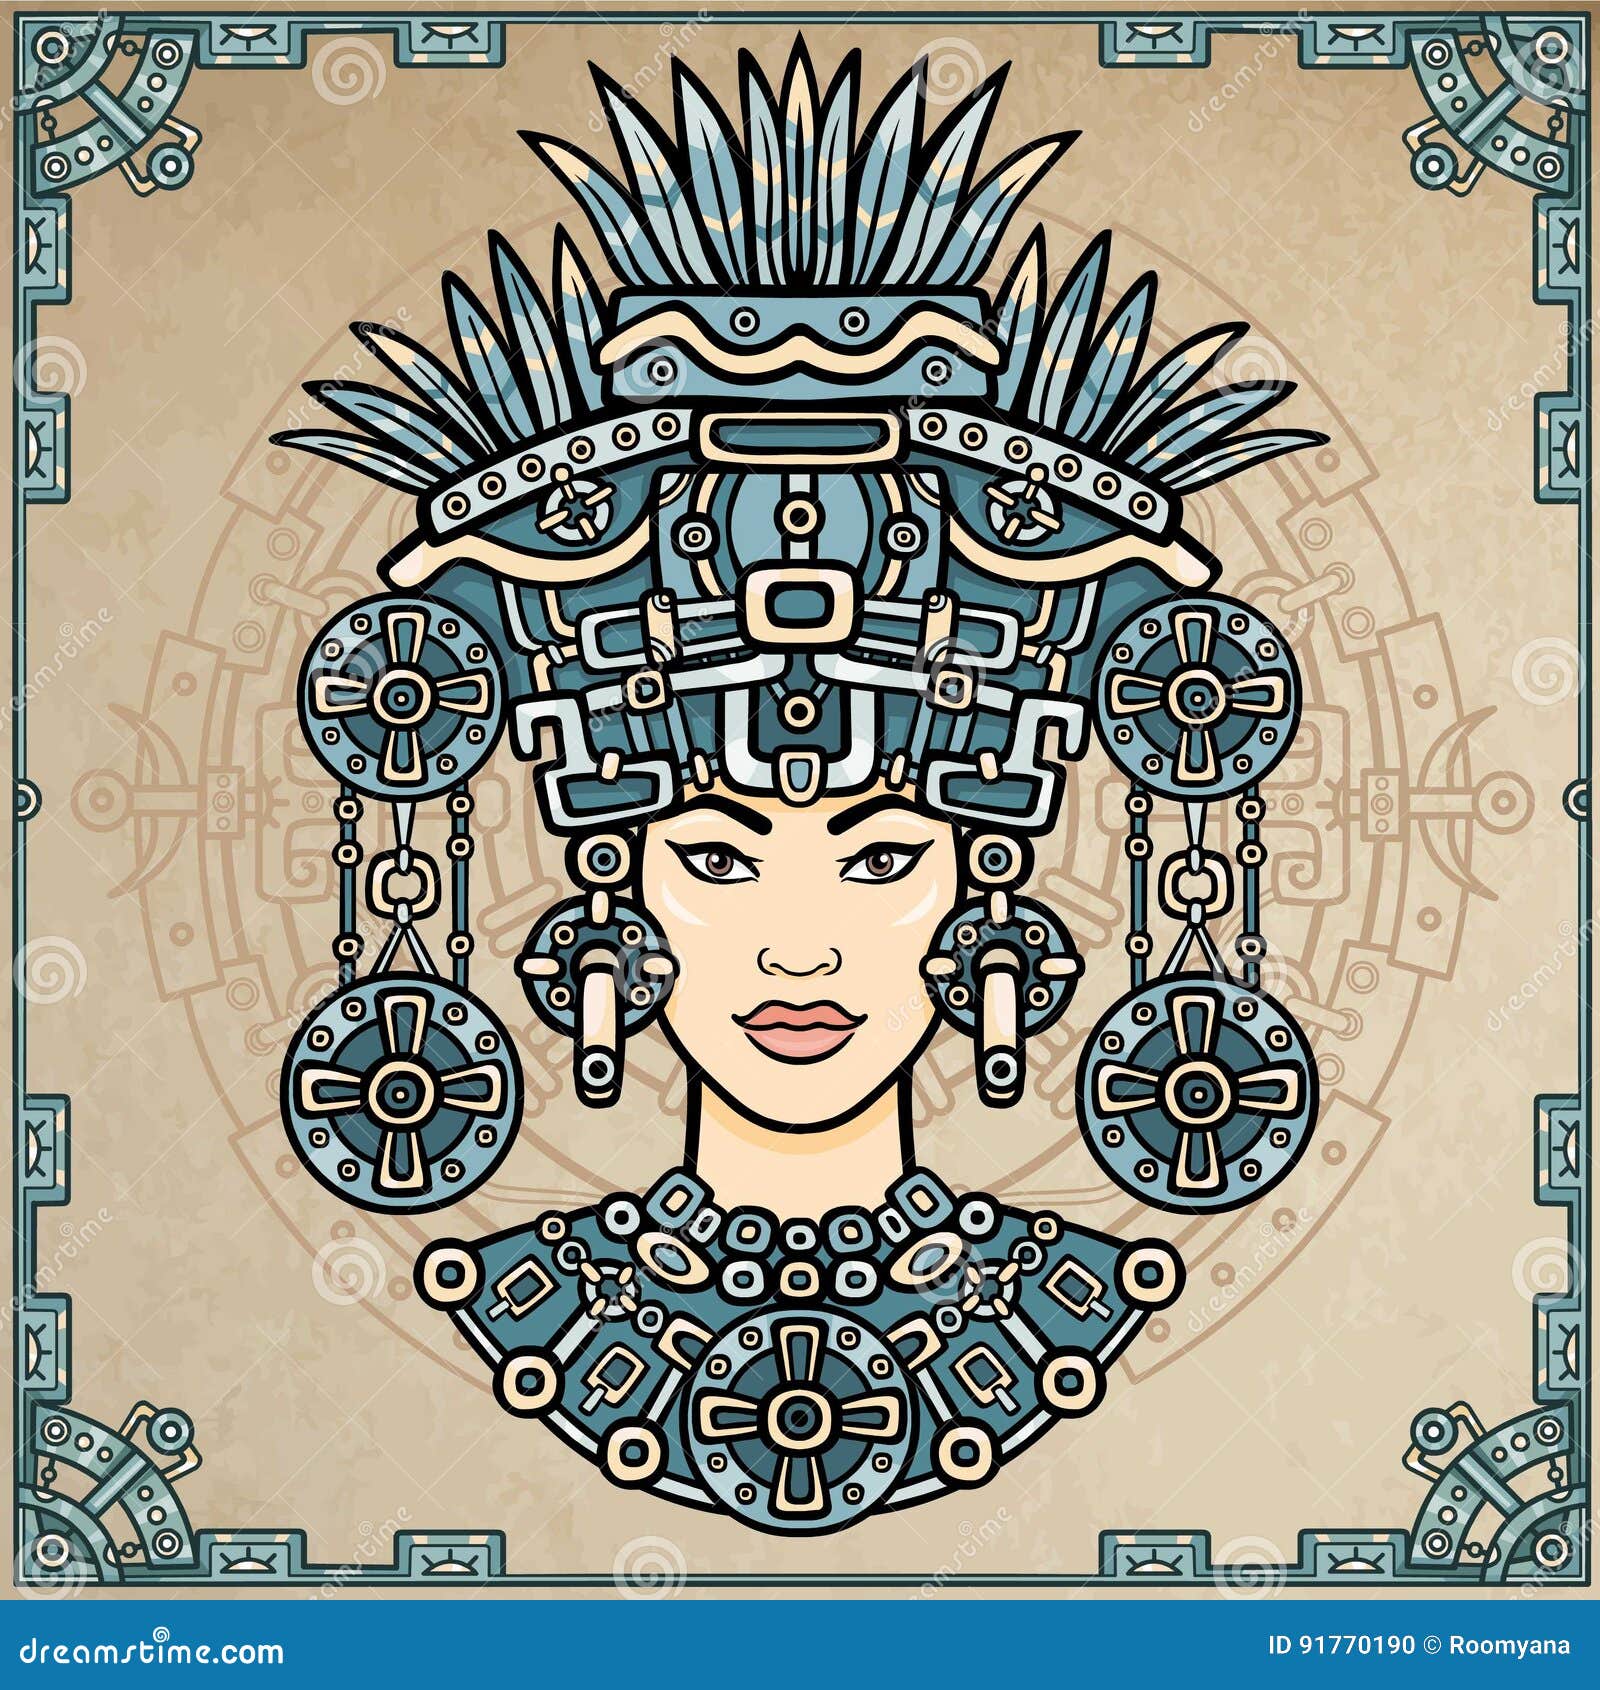 animation portrait of the pagan goddess based on motives of art native american indian. color decorative drawing.